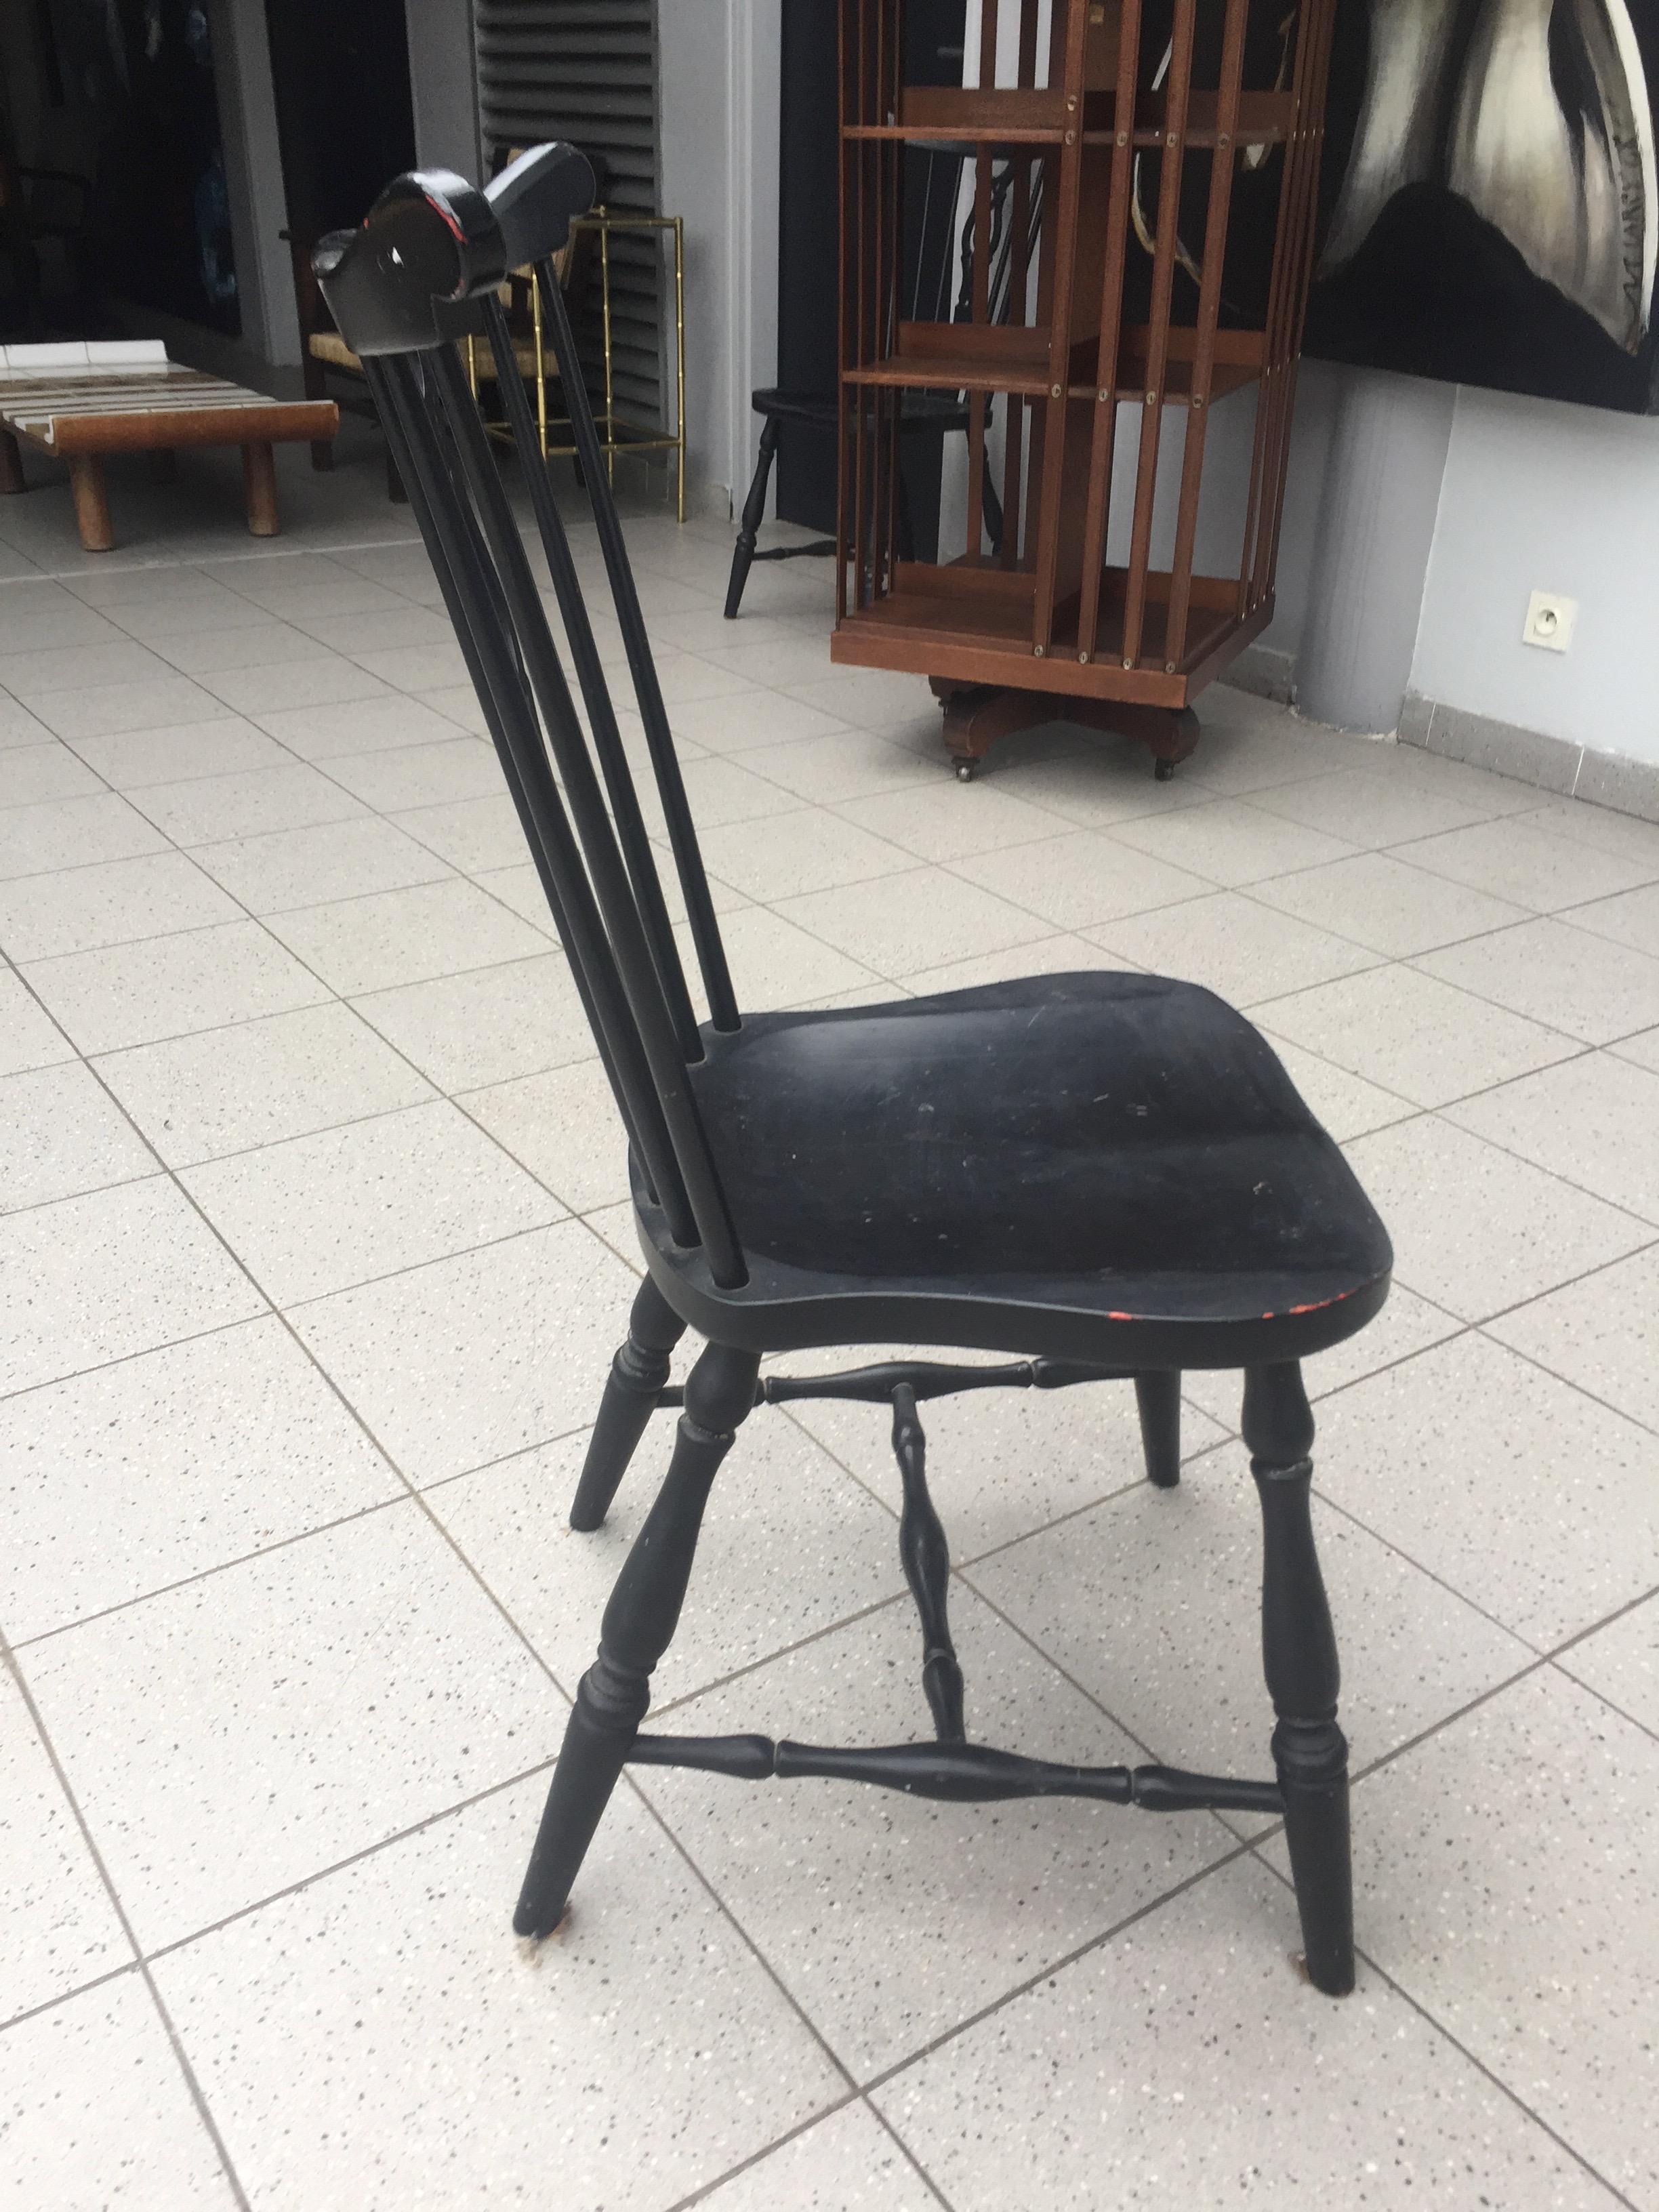 Pearwood Pair of Black Lacquered Wood Chairs from Gemla Diö, 1950s For Sale